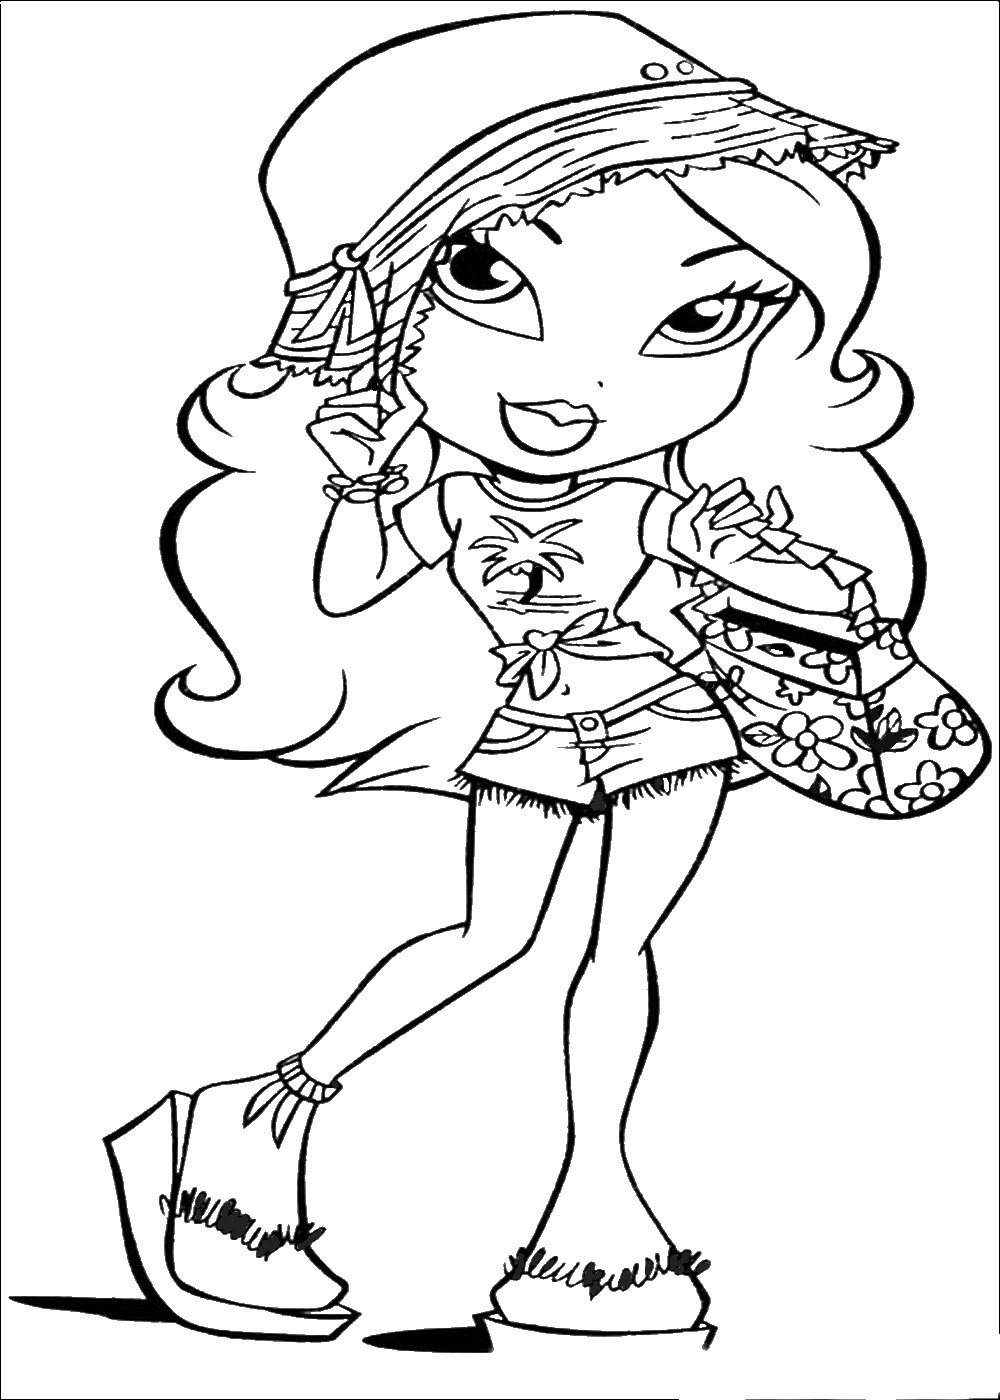 Bratz Printable Coloring Pages at GetColorings.com | Free printable ...